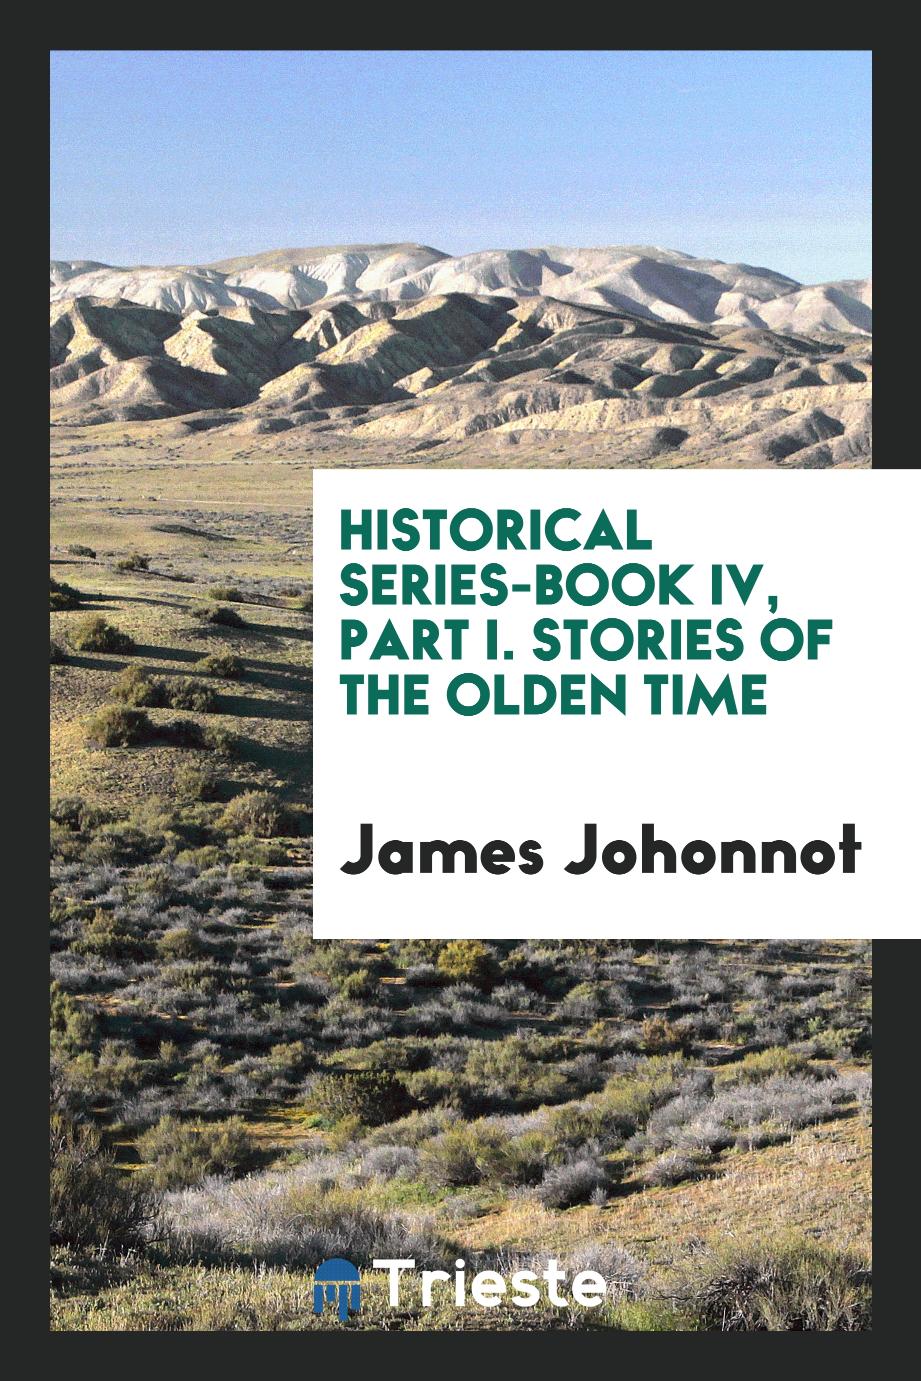 Historical Series-Book IV, Part I. Stories of the Olden Time